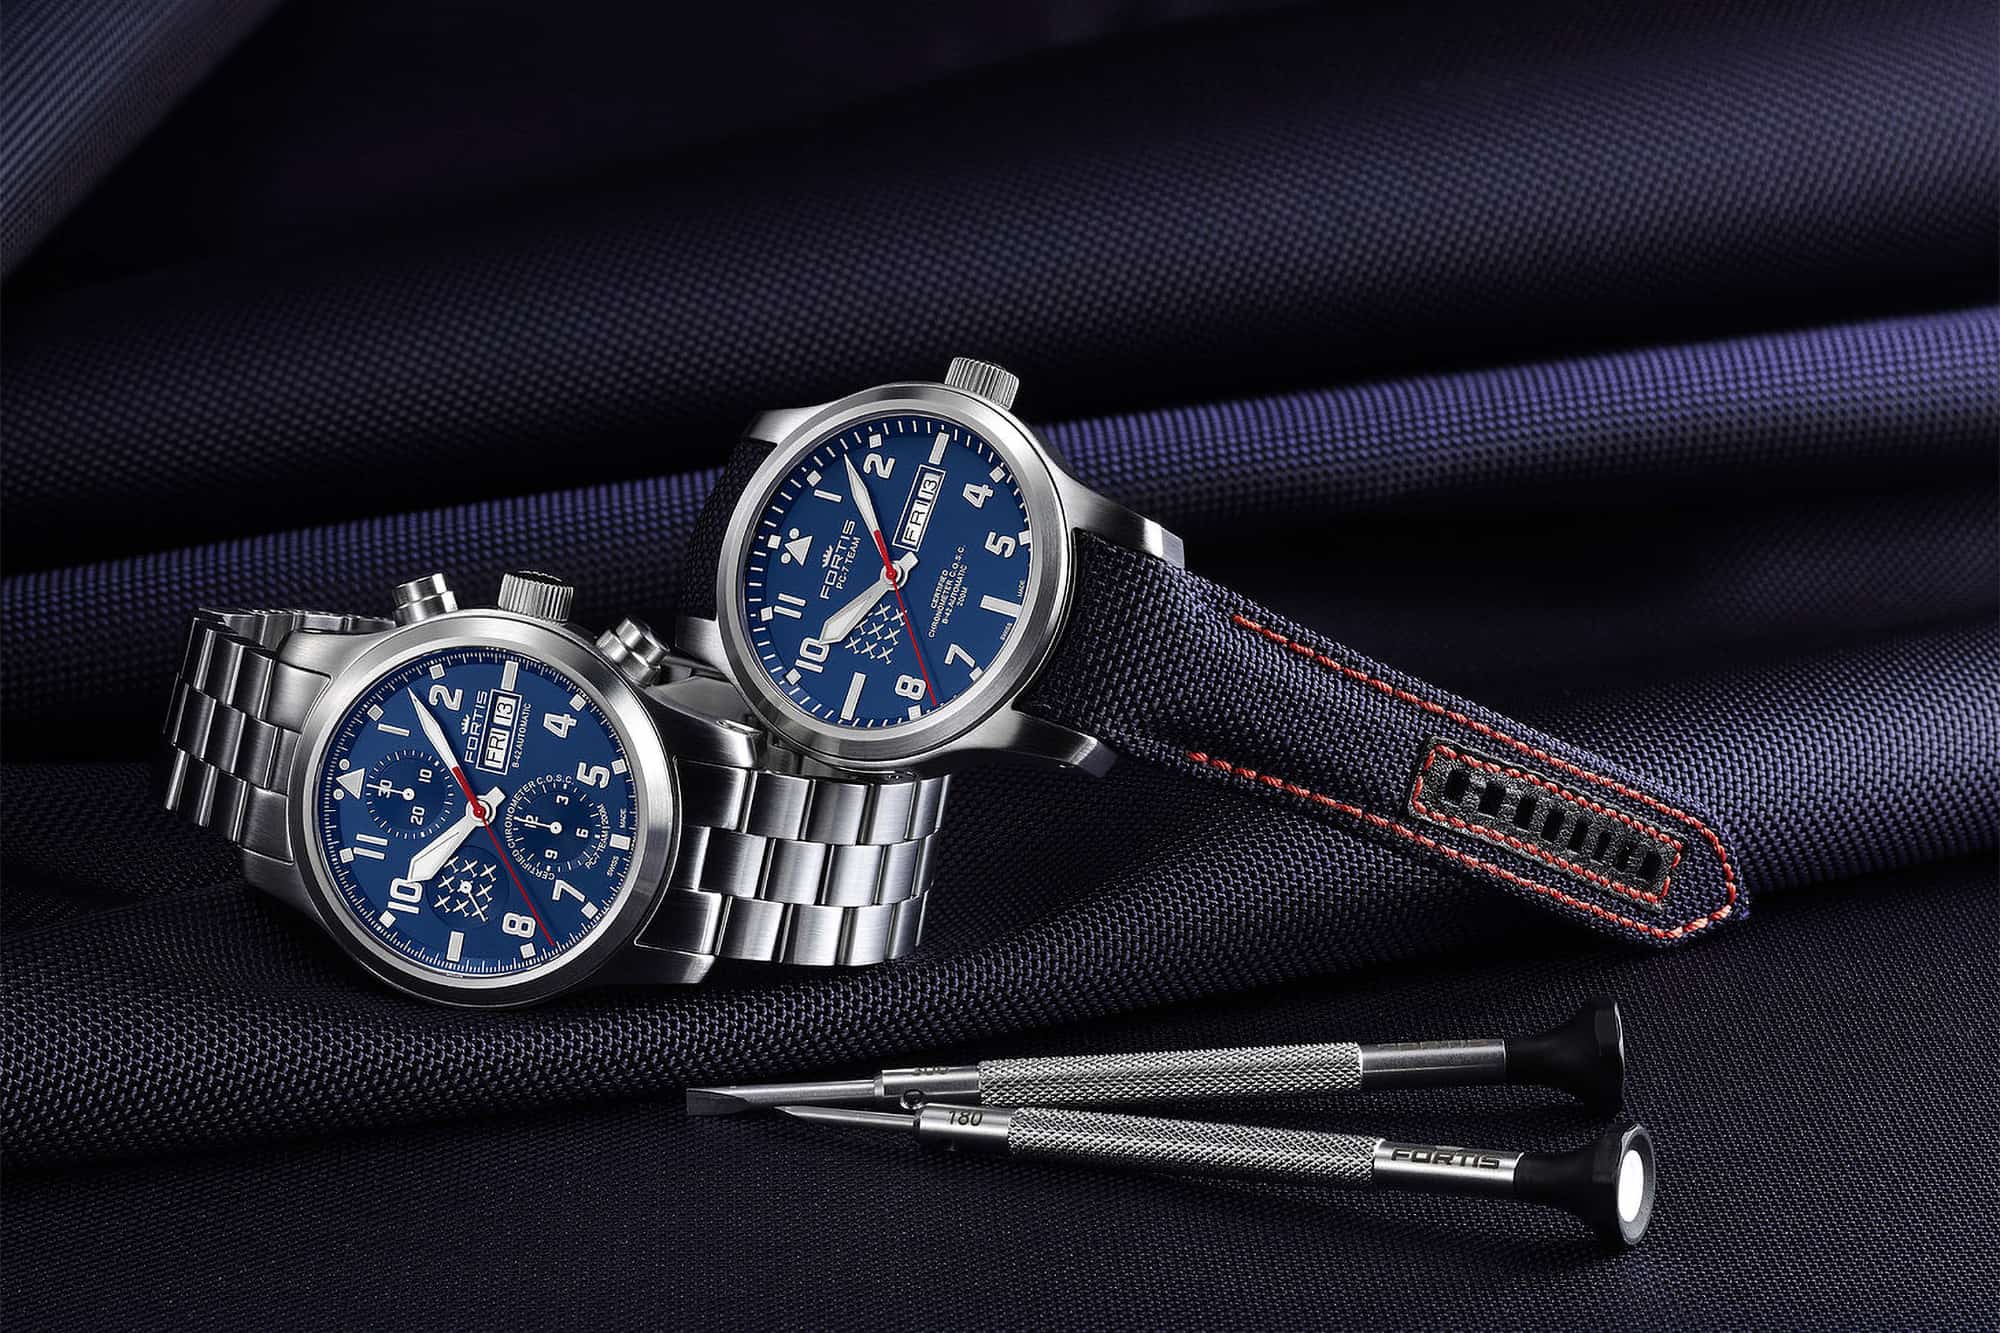 Introducing the Fortis PC-7 TEAM Aeromaster Chronograph and Day-Date - Worn  & Wound